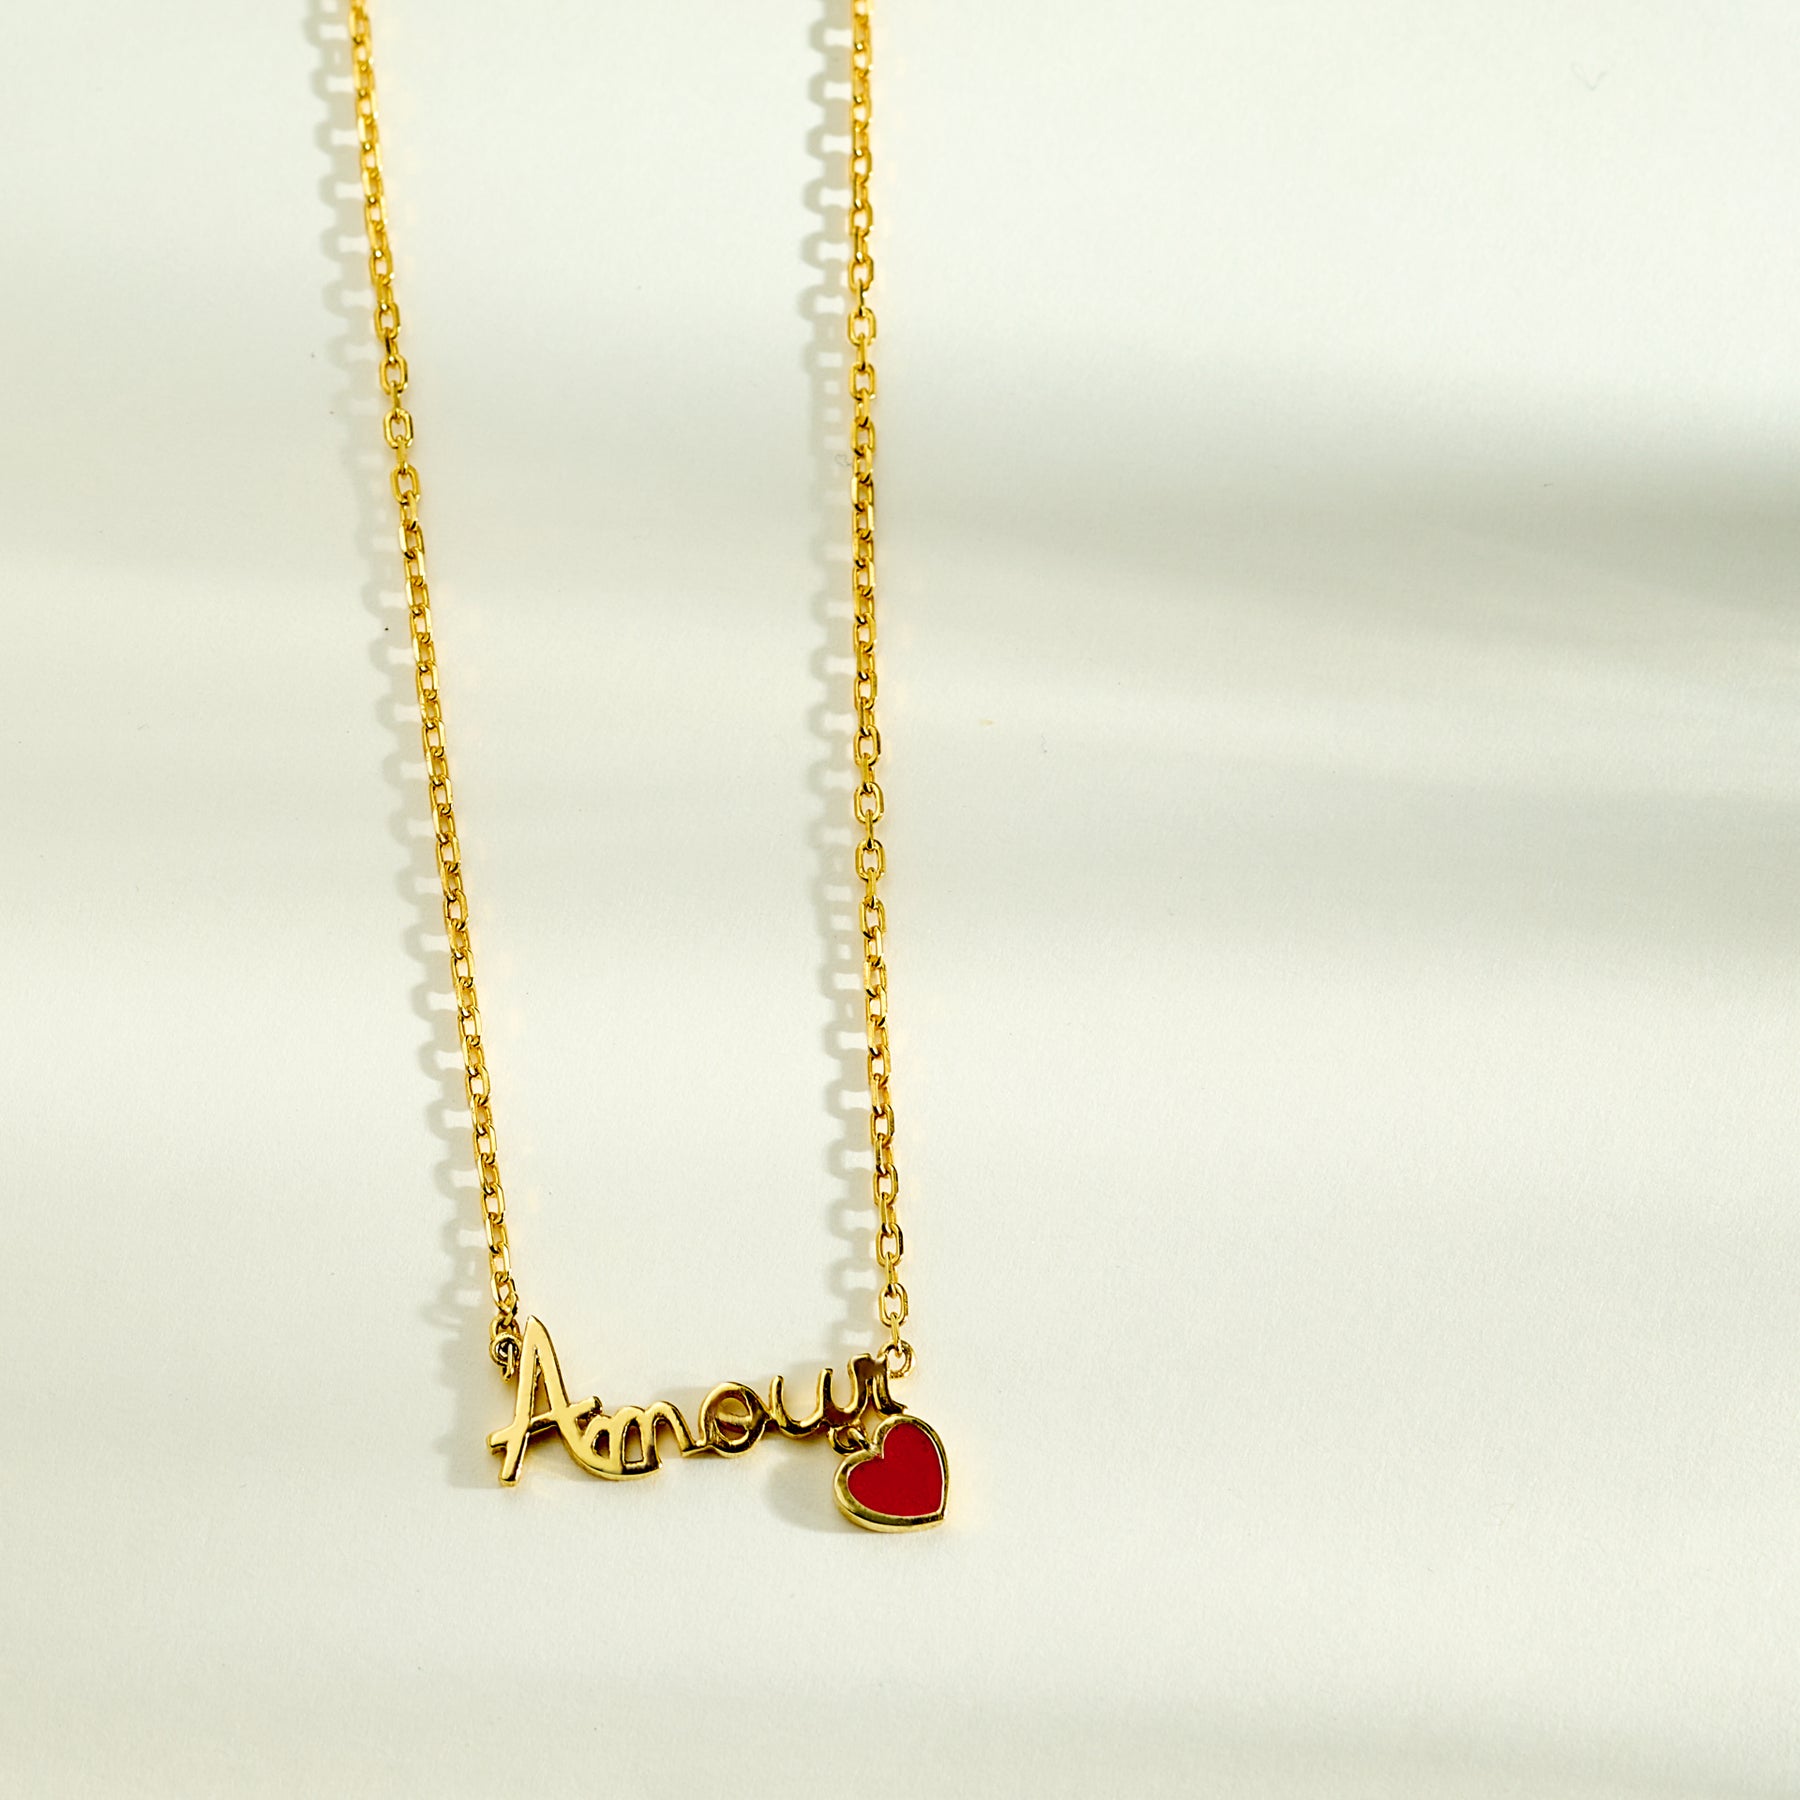 Collier "Amour horizontal" plaqué or